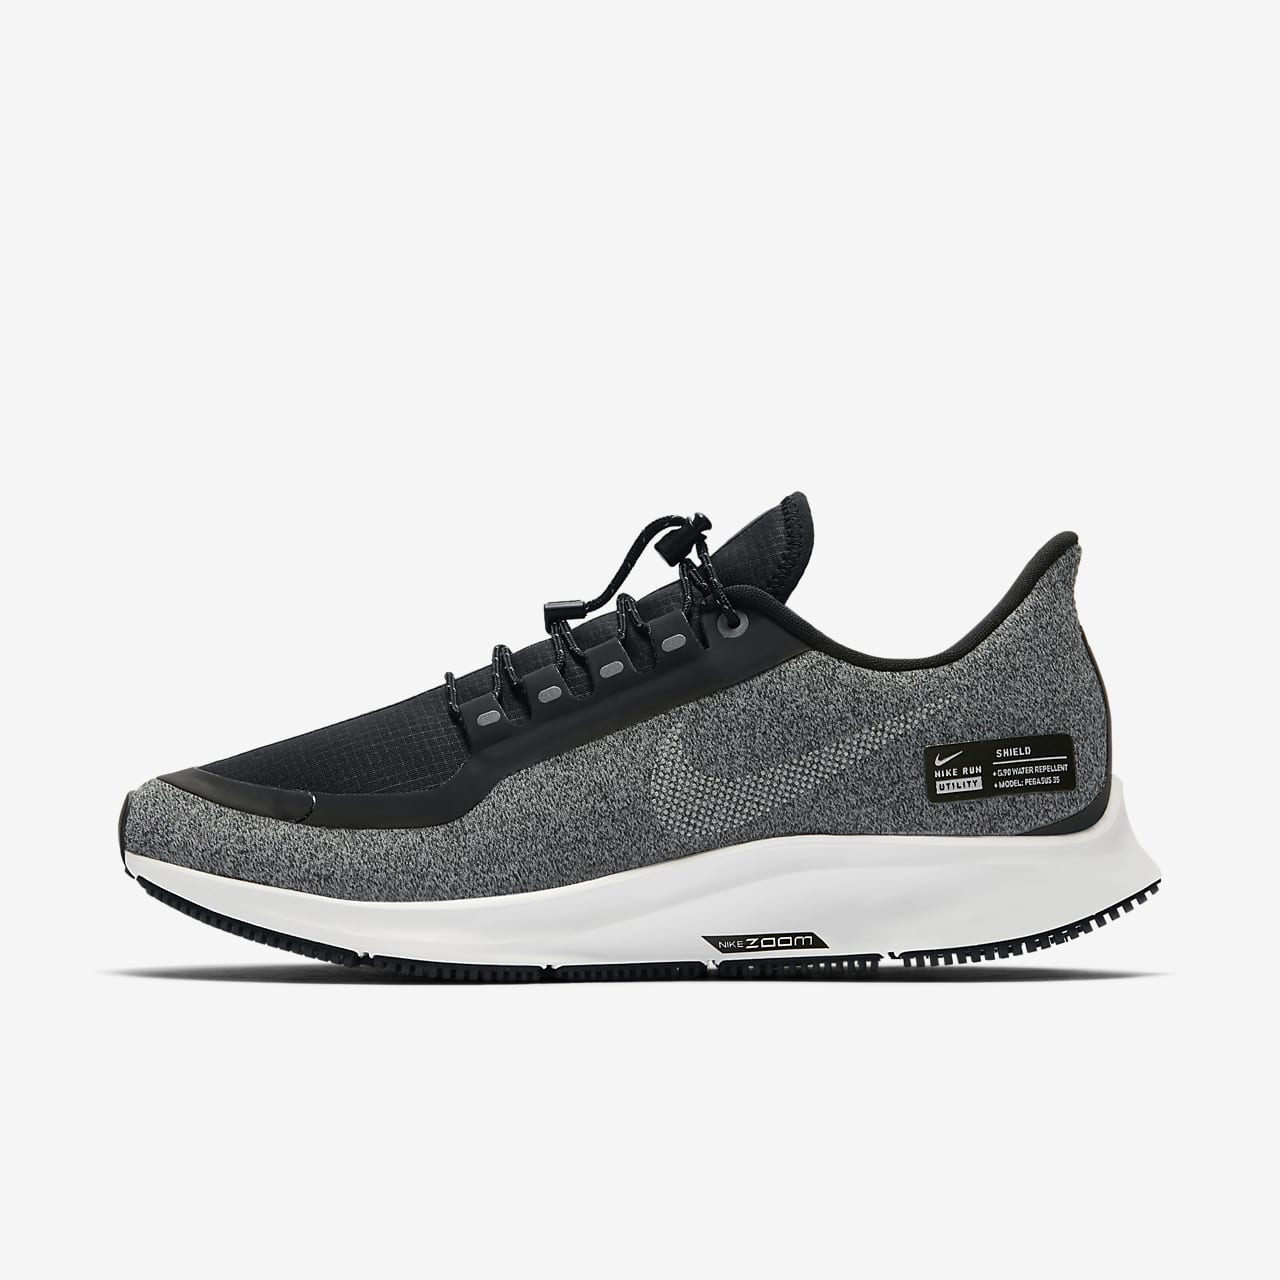 Introduce Additive Flatter Womens Nike Air Zoom Pegasus 35 Shield Sale, SAVE 44% - aveclumiere.com